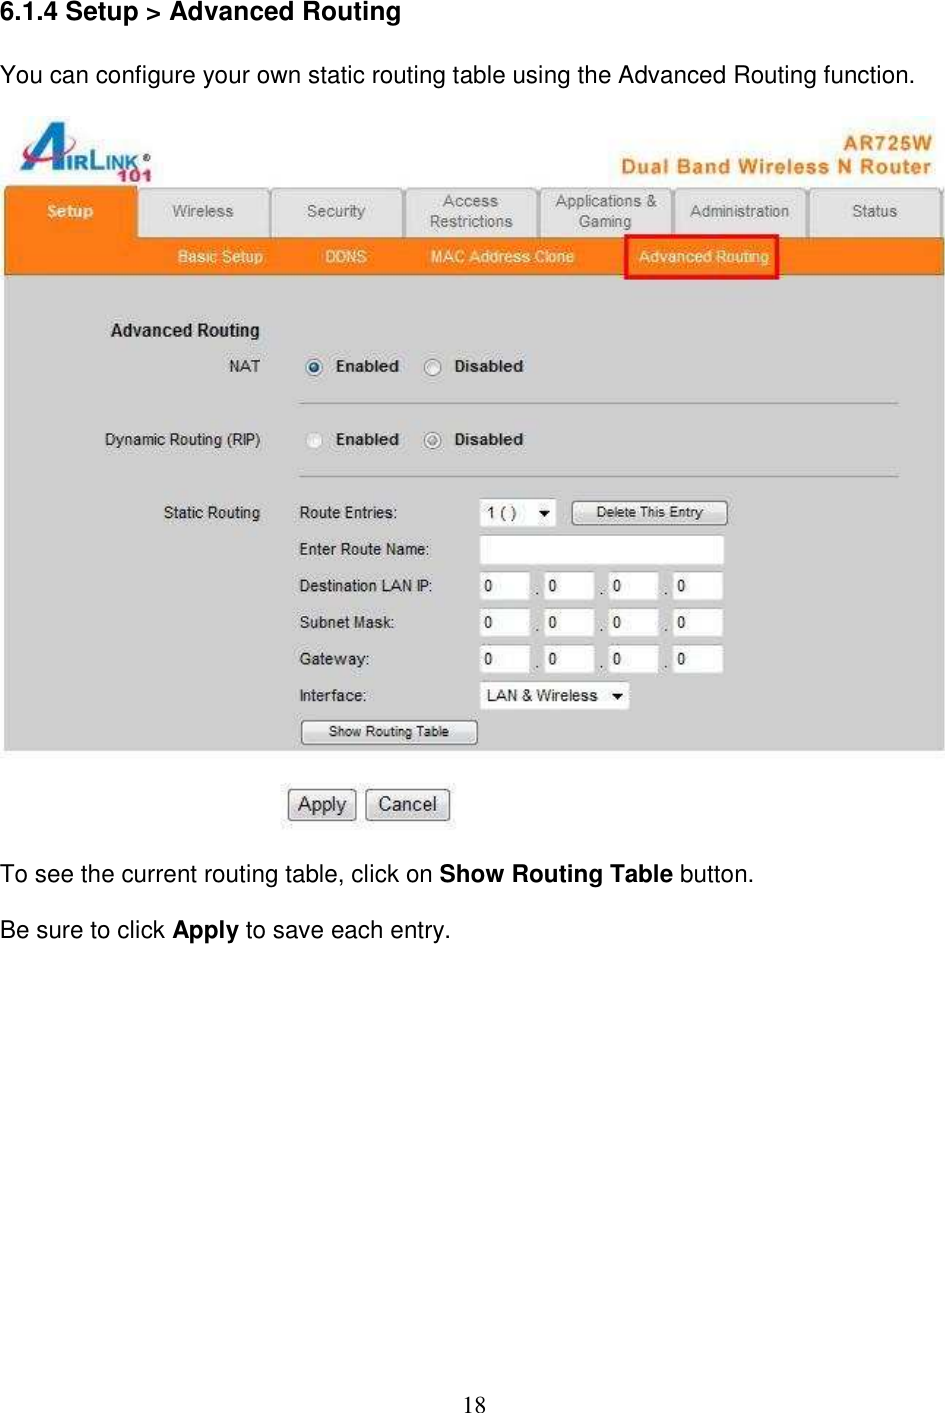 18 6.1.4 Setup &gt; Advanced Routing  You can configure your own static routing table using the Advanced Routing function.    To see the current routing table, click on Show Routing Table button.  Be sure to click Apply to save each entry.              